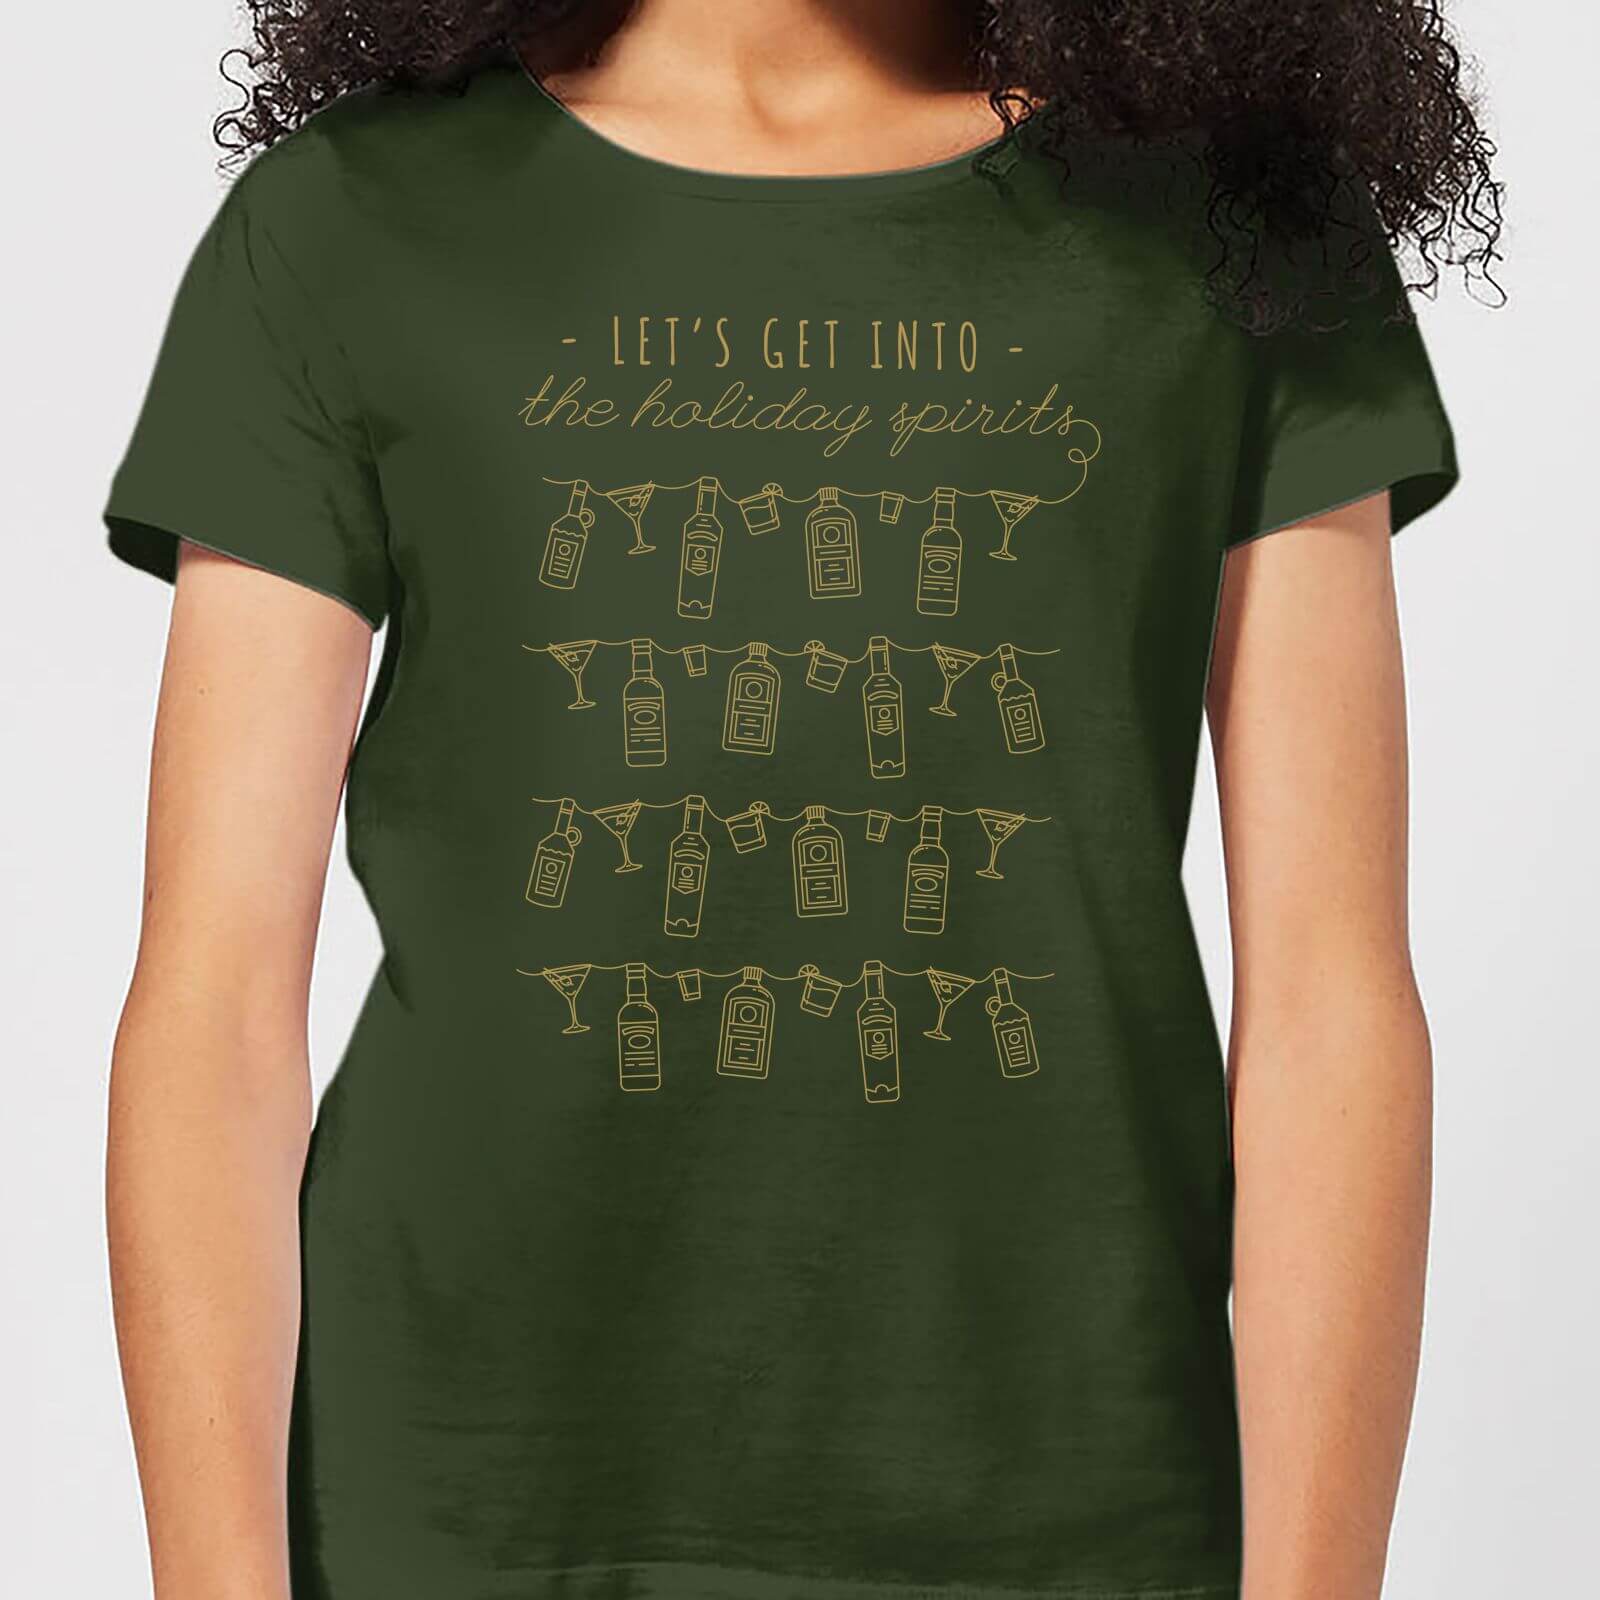 Let's Get Into The Christmas Spirits Women's T-Shirt - Forest Green - S